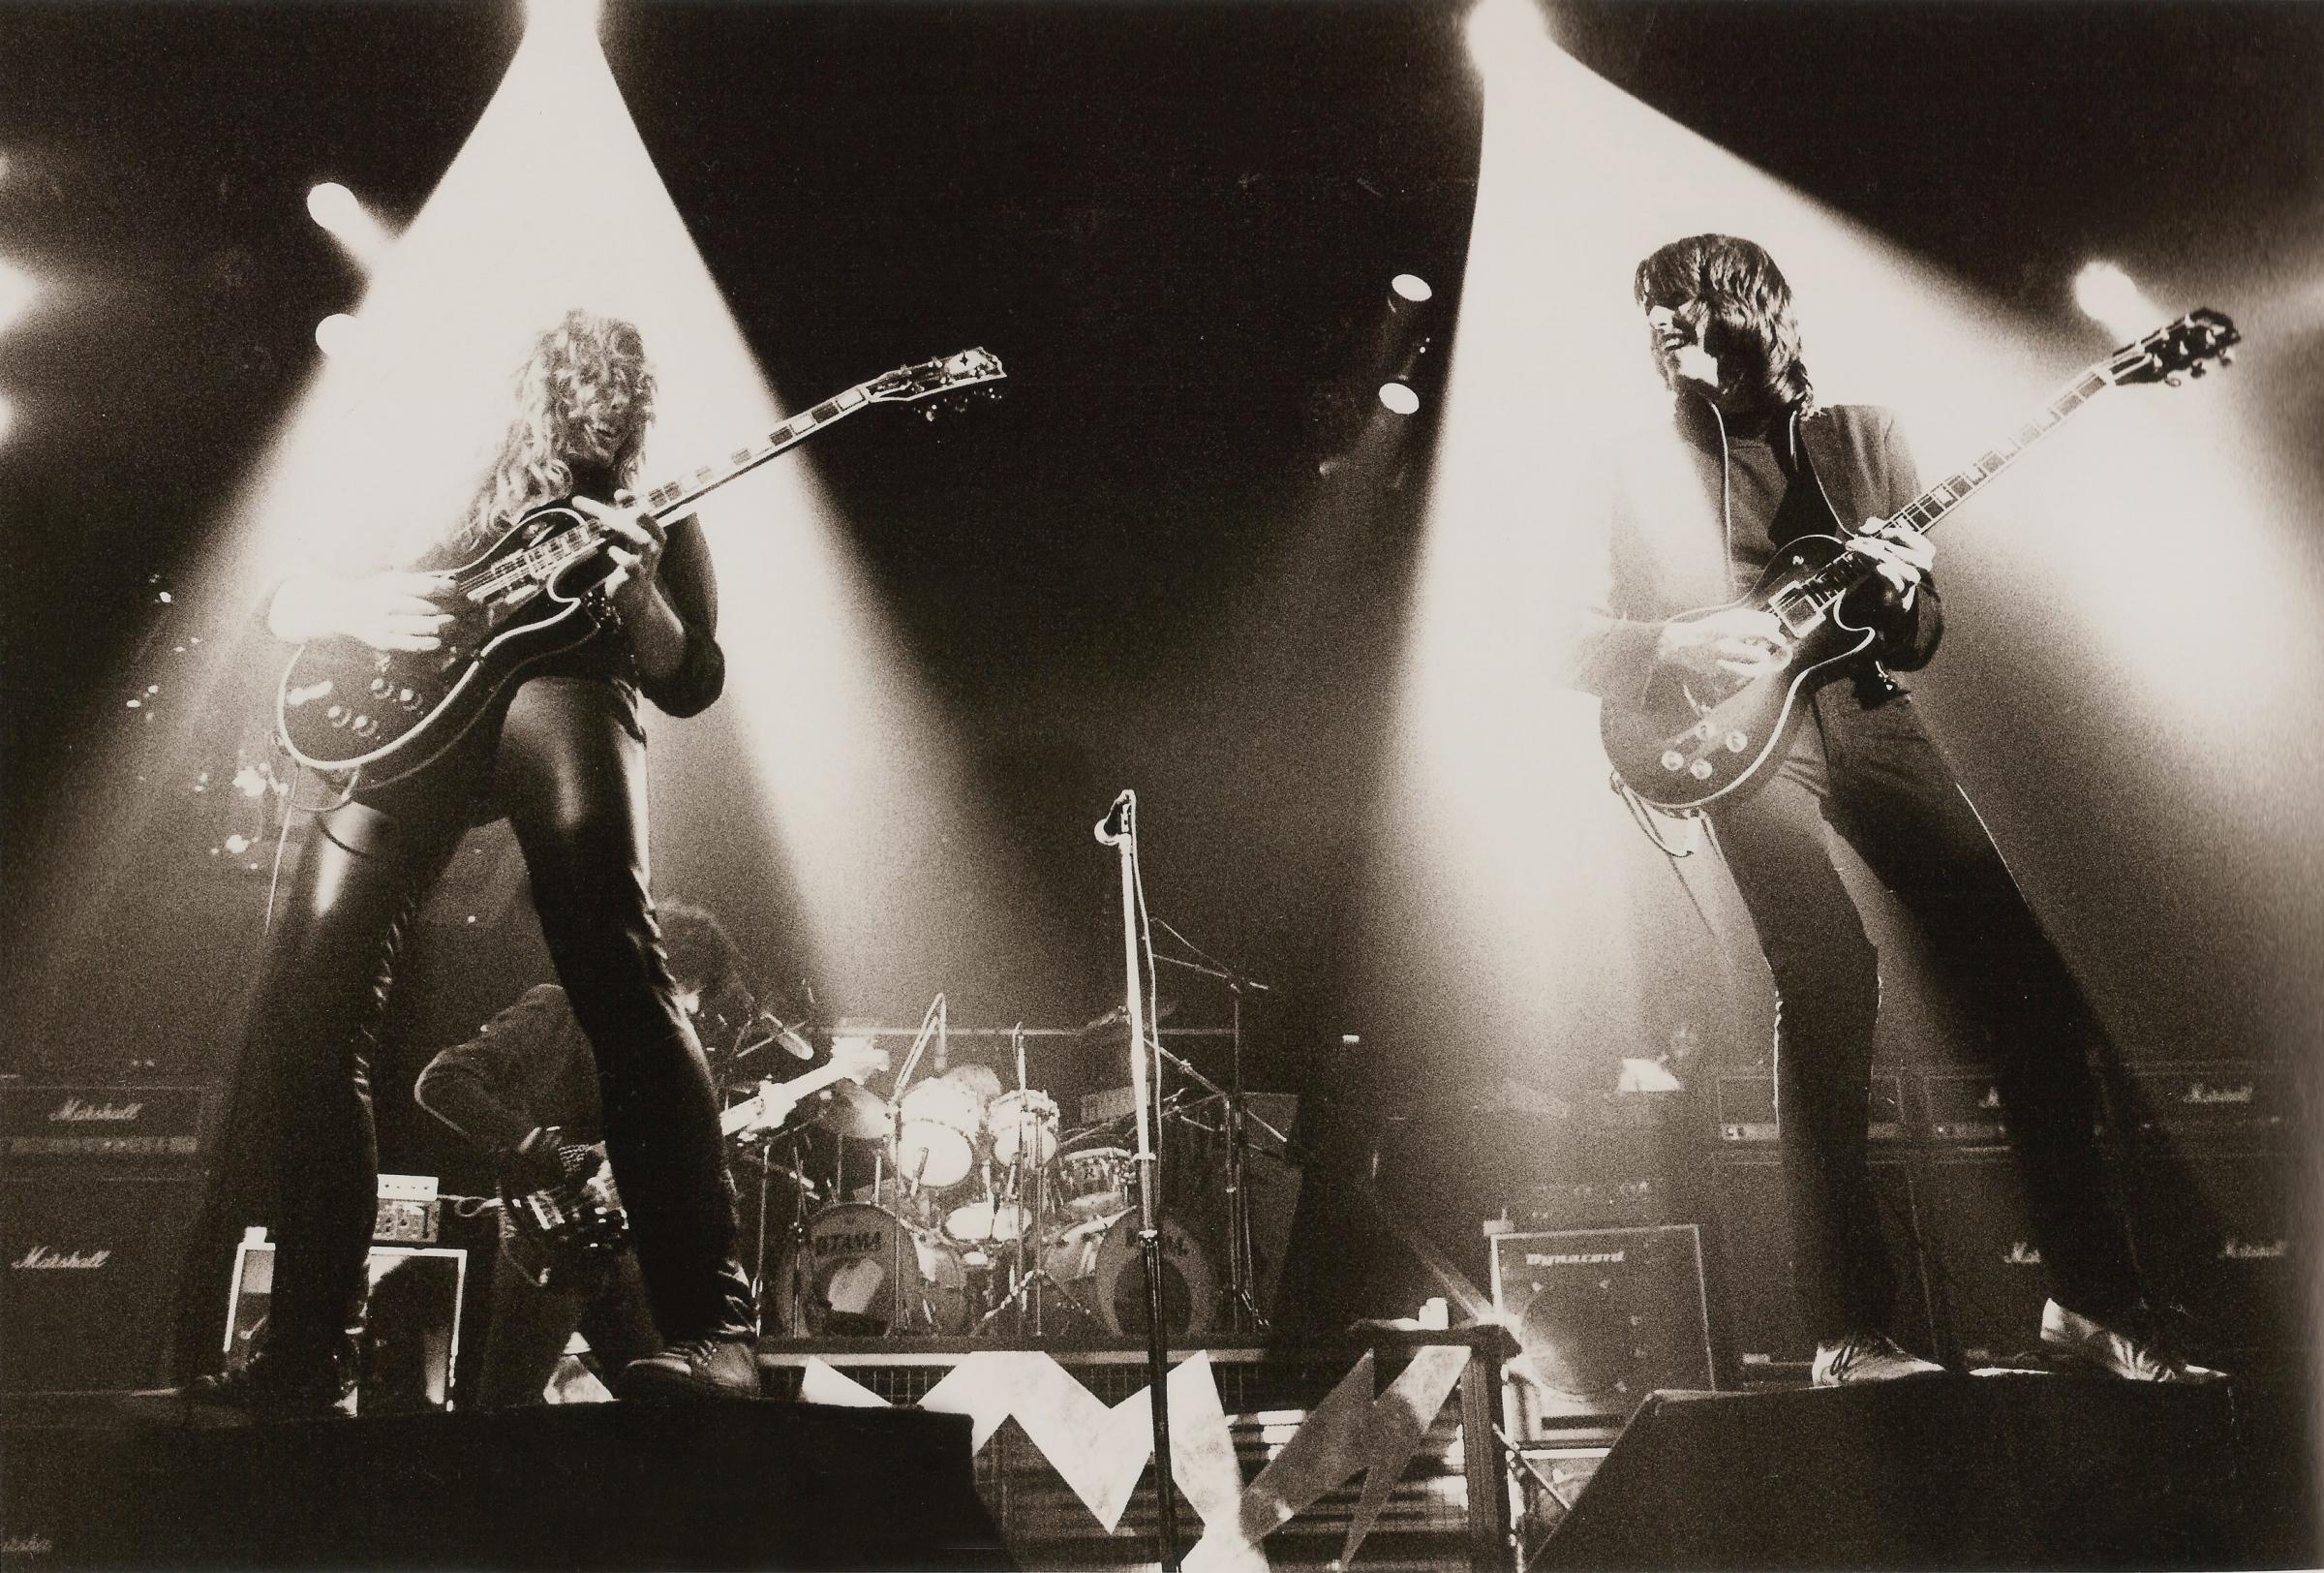 The night Thin Lizzy frontman prevented a riot in Glasgow's famous Apollo